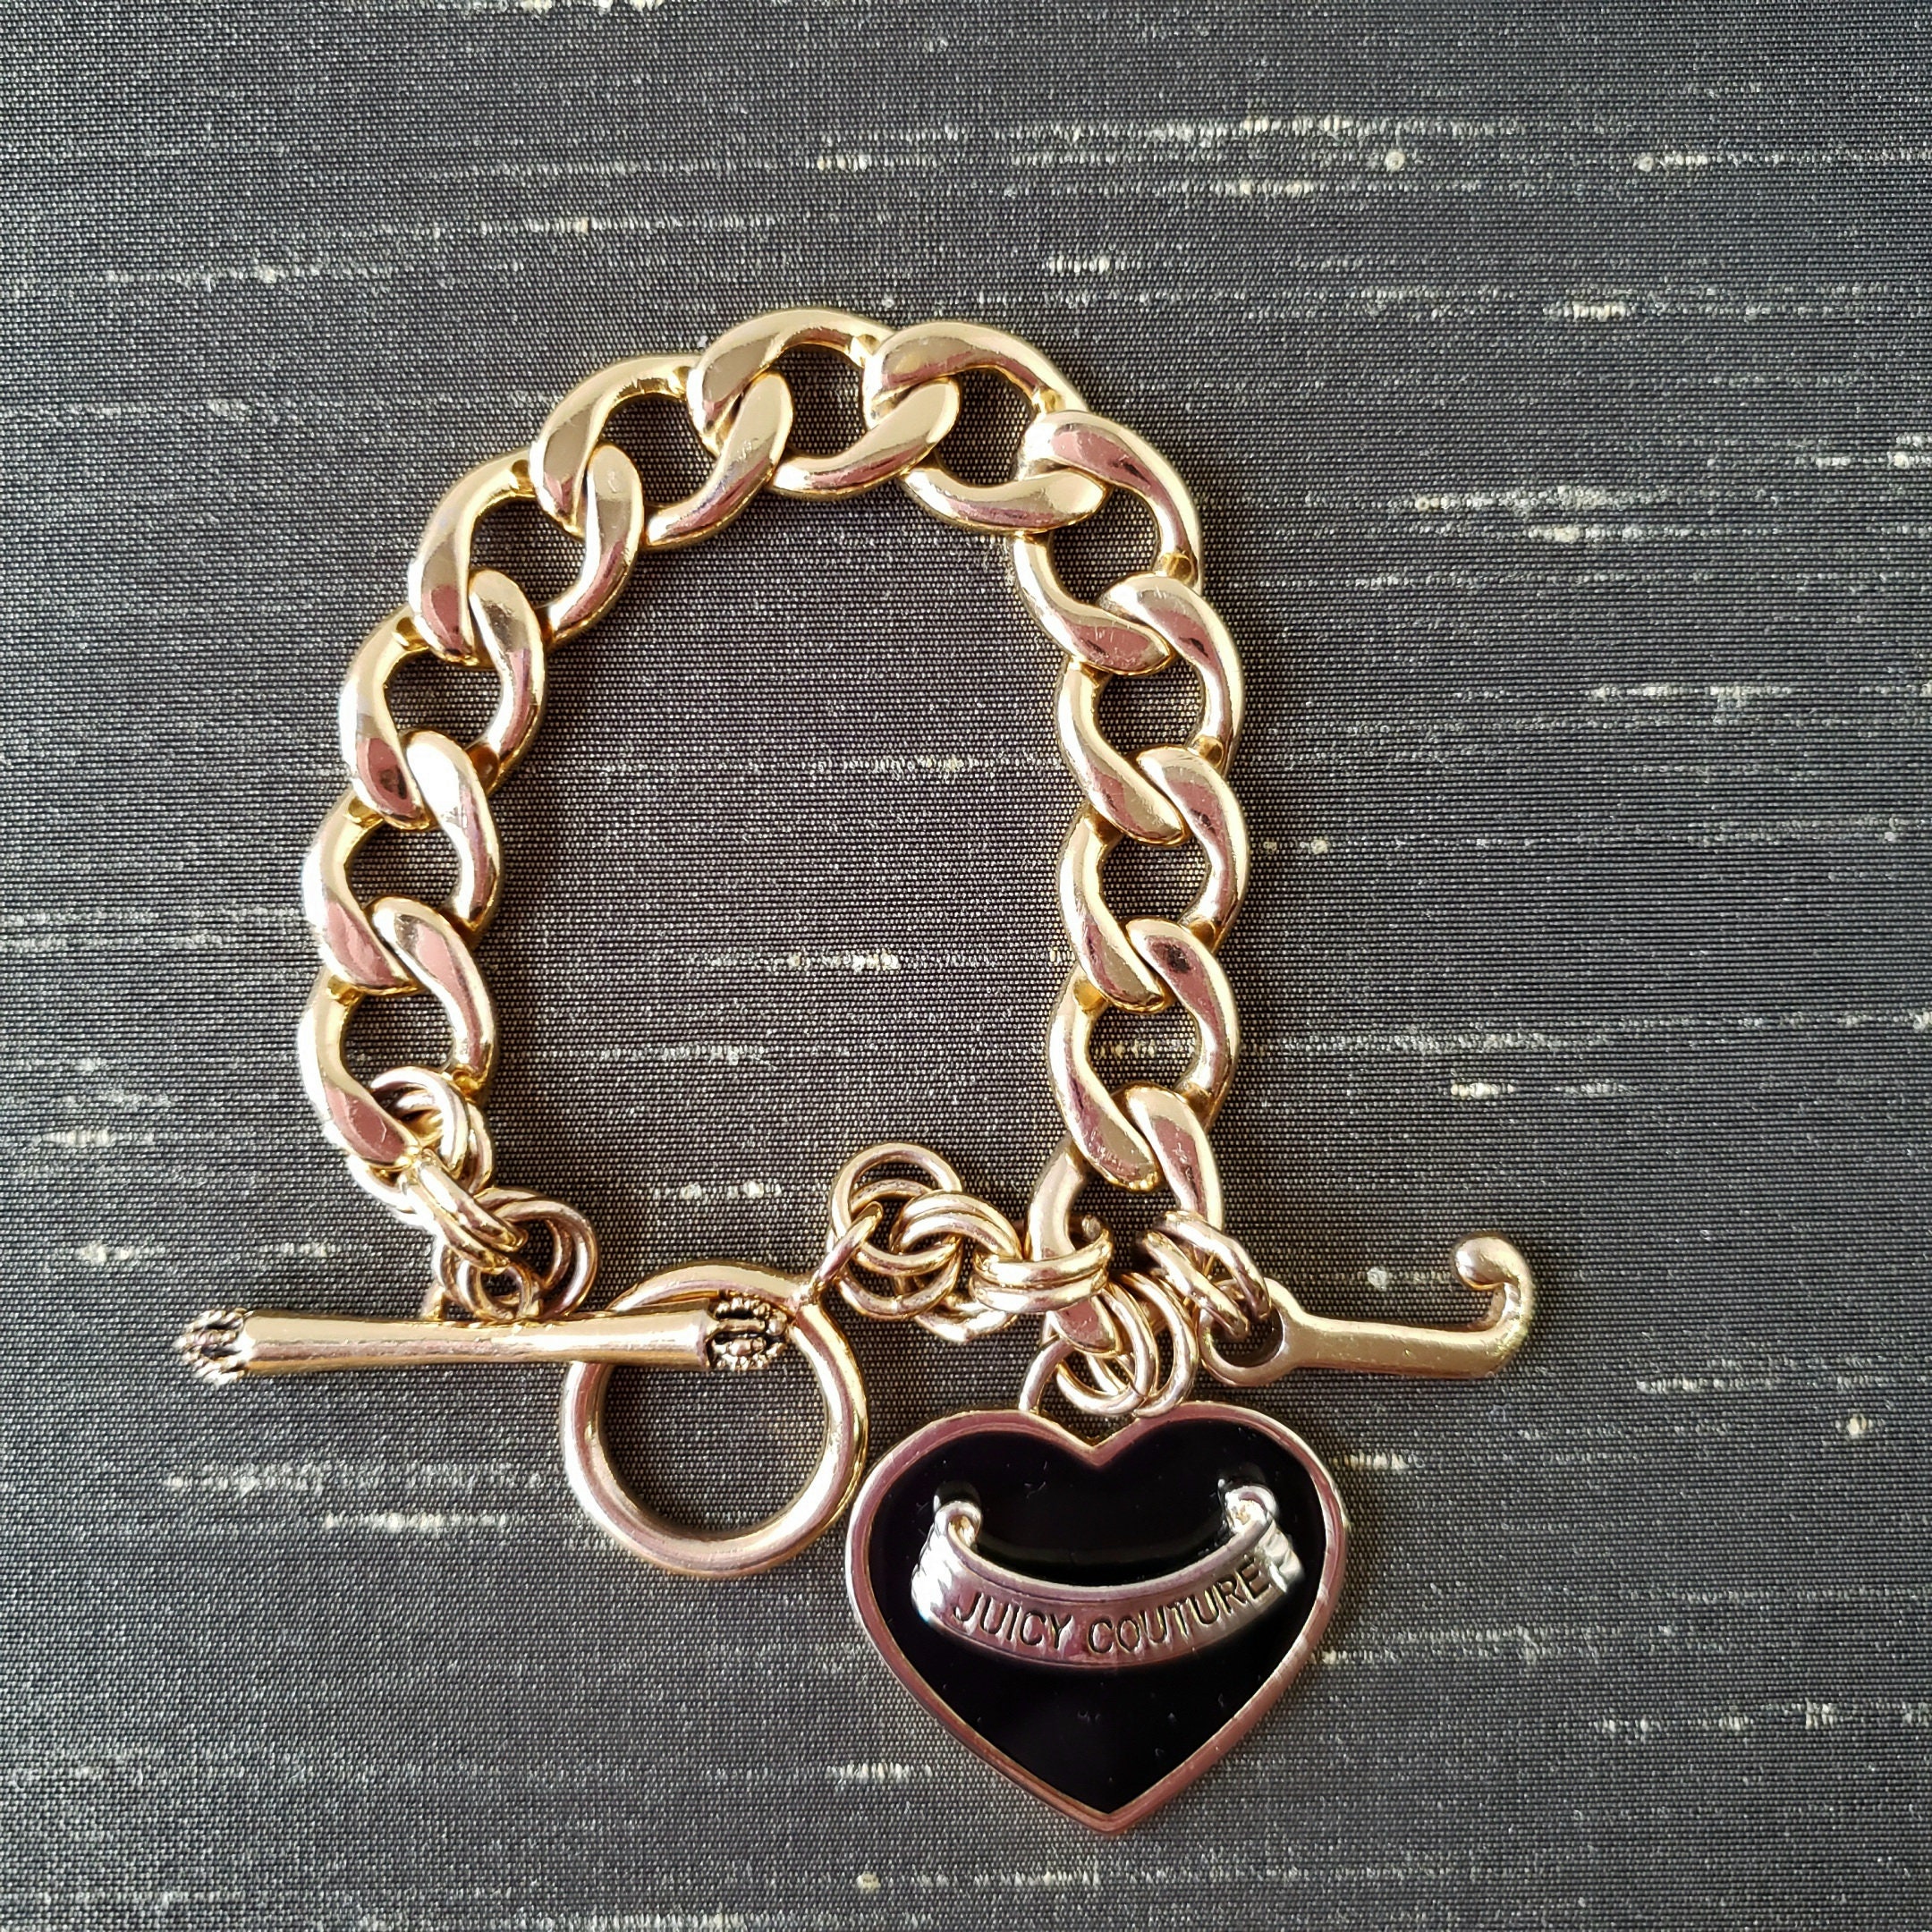 Kids Juicy Couture Gold Charm Bracelet Valentine Heart Bow Candy Cupcake  Rare.